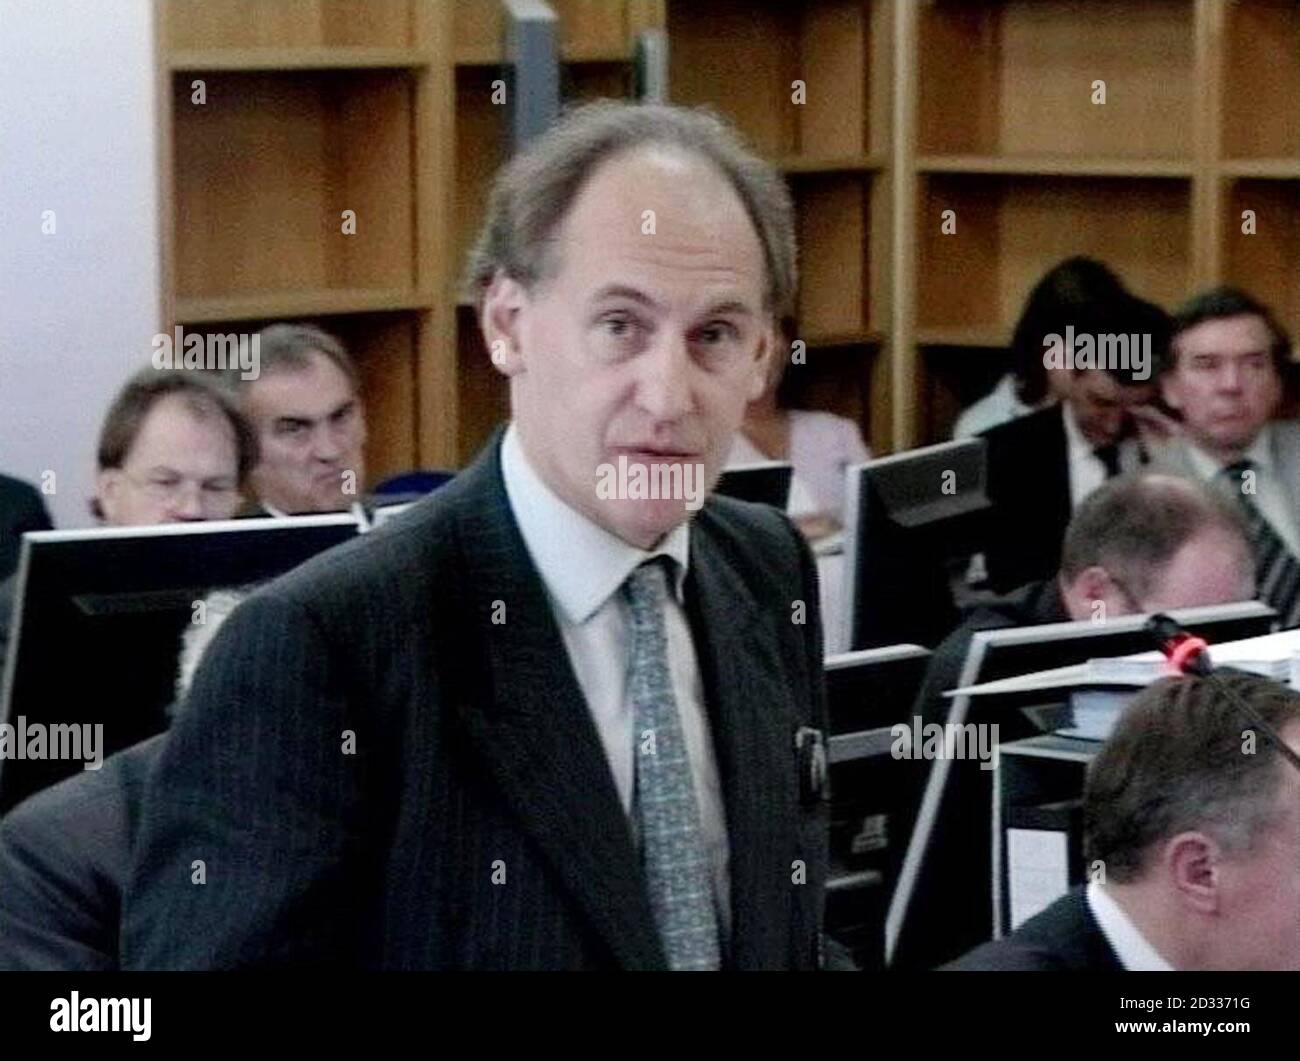 Andrew Caldecott, QC, counsel for the BBC, making his closing statement to the Hutton Inquiry at the High Court in London. Lord Hutton has been inquiring into the events surrounding the apparent suicide of weapons expert Dr David Kelly who was at the centre of a row between the Government and the BBC after admitting talking to journalist Andrew Gilligan, who reported that the Government had 'sexed up' its Iraq dossier. Stock Photo